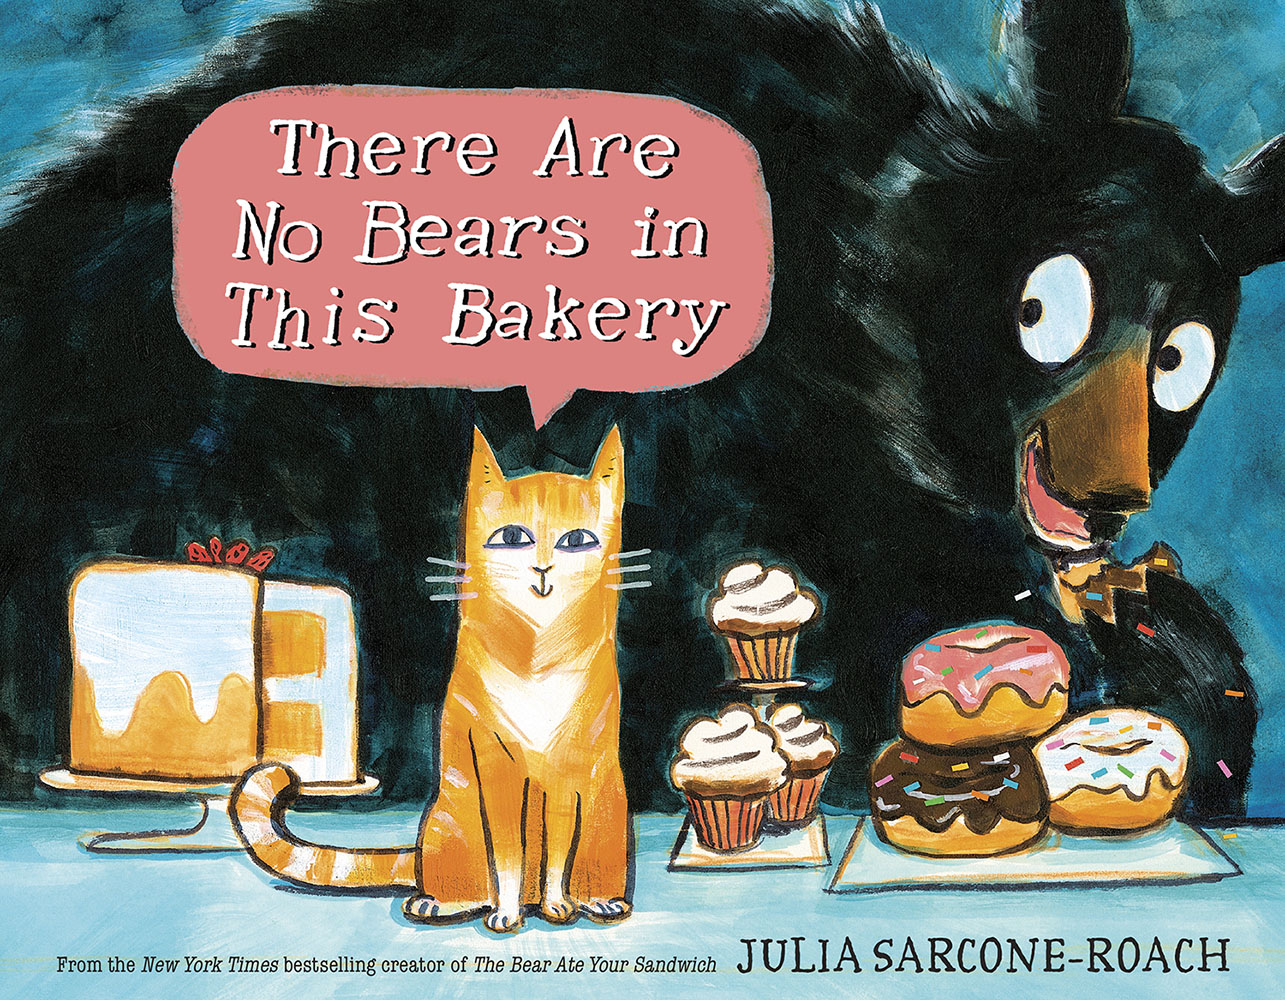 Sarcone-Roach, Julia 2019_01 - THERE ARE NO BEARS IN THIS BAKERY - PB - RLM PR.jpg